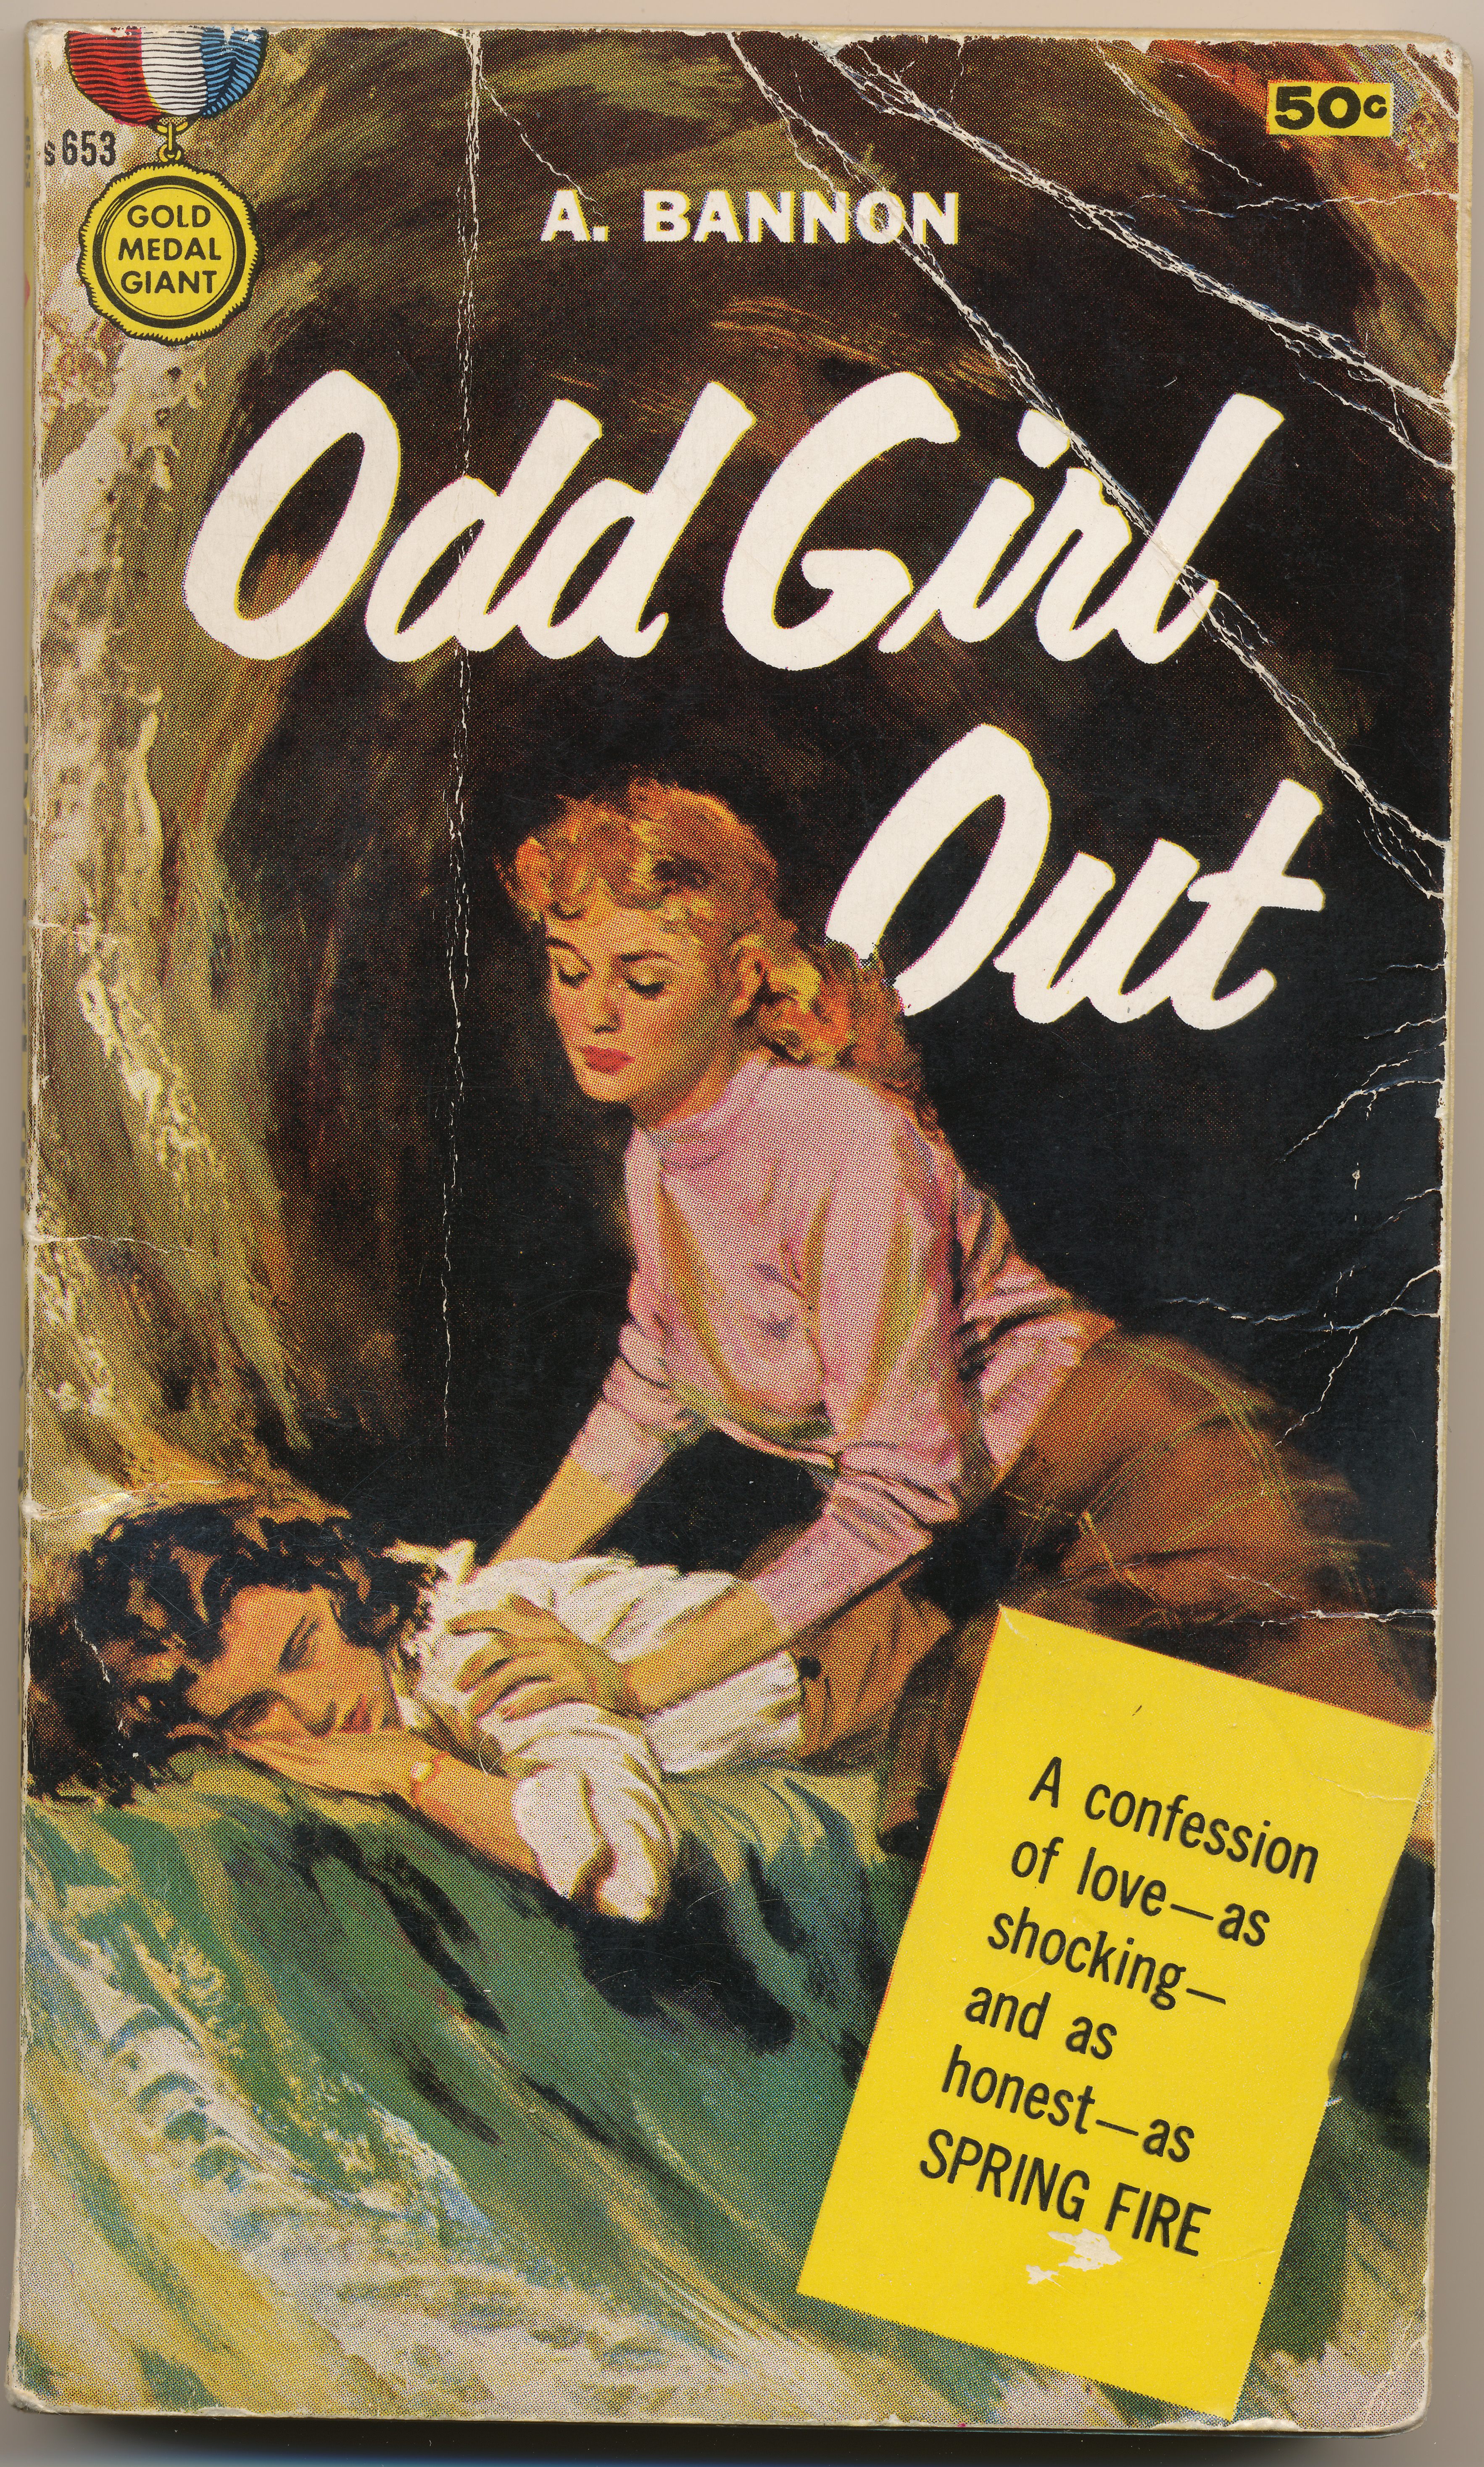 The Lesbian Pulp Fiction That Saved Lives